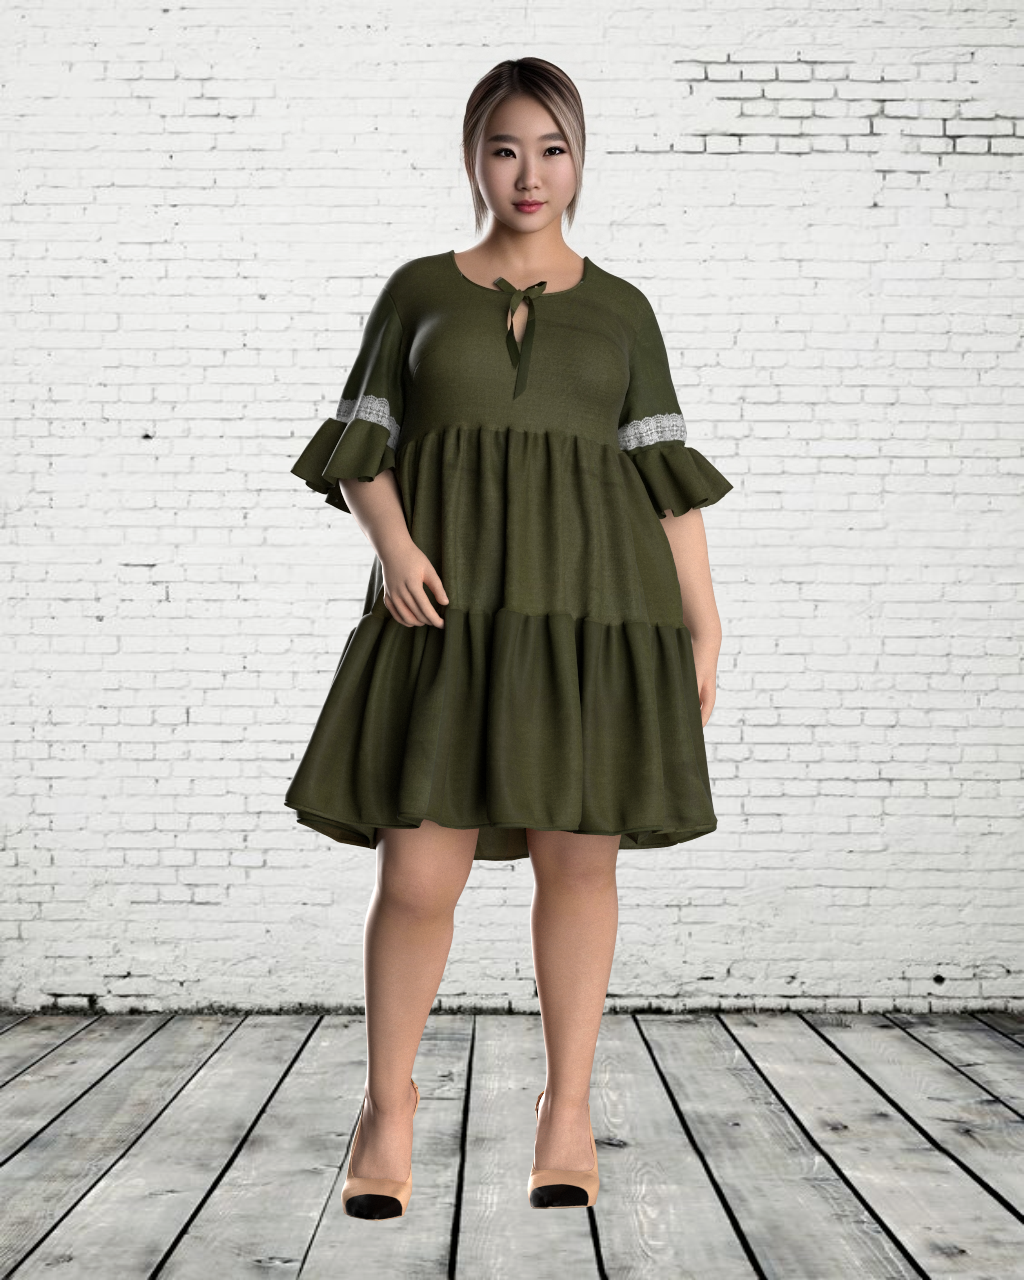 Tiered ruched dress with ruffle sleeve hem |Affordable custom clothing | Custom made clothing online | house of supr | Custom tailored outfits | Tailored fit garments | Made to fit clothing | 